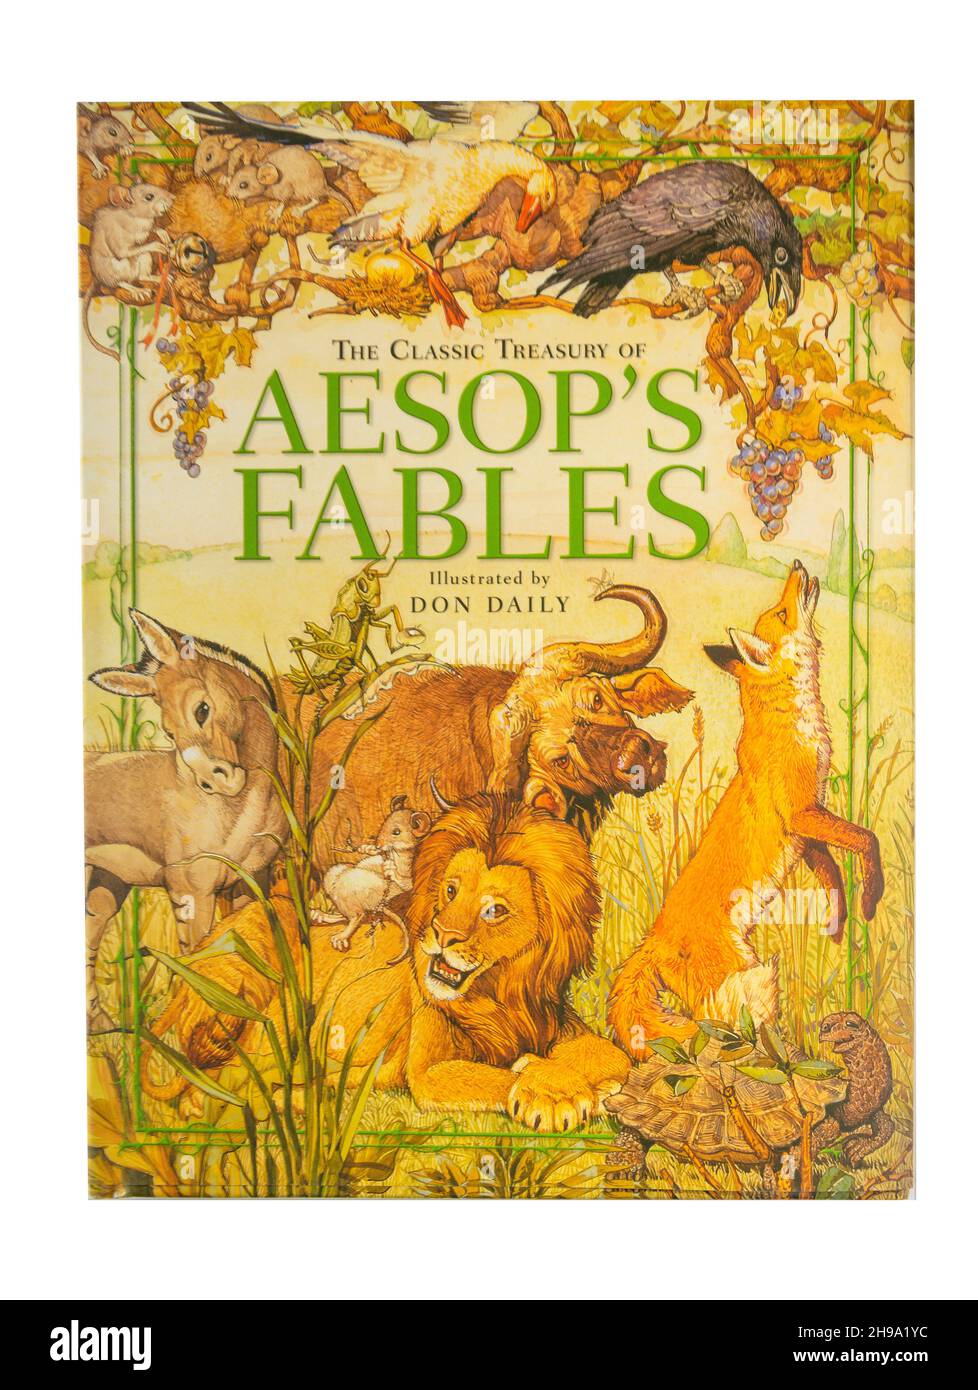 Aesop's Fables Book, Grand Londres, Angleterre, Royaume-Uni Banque D'Images